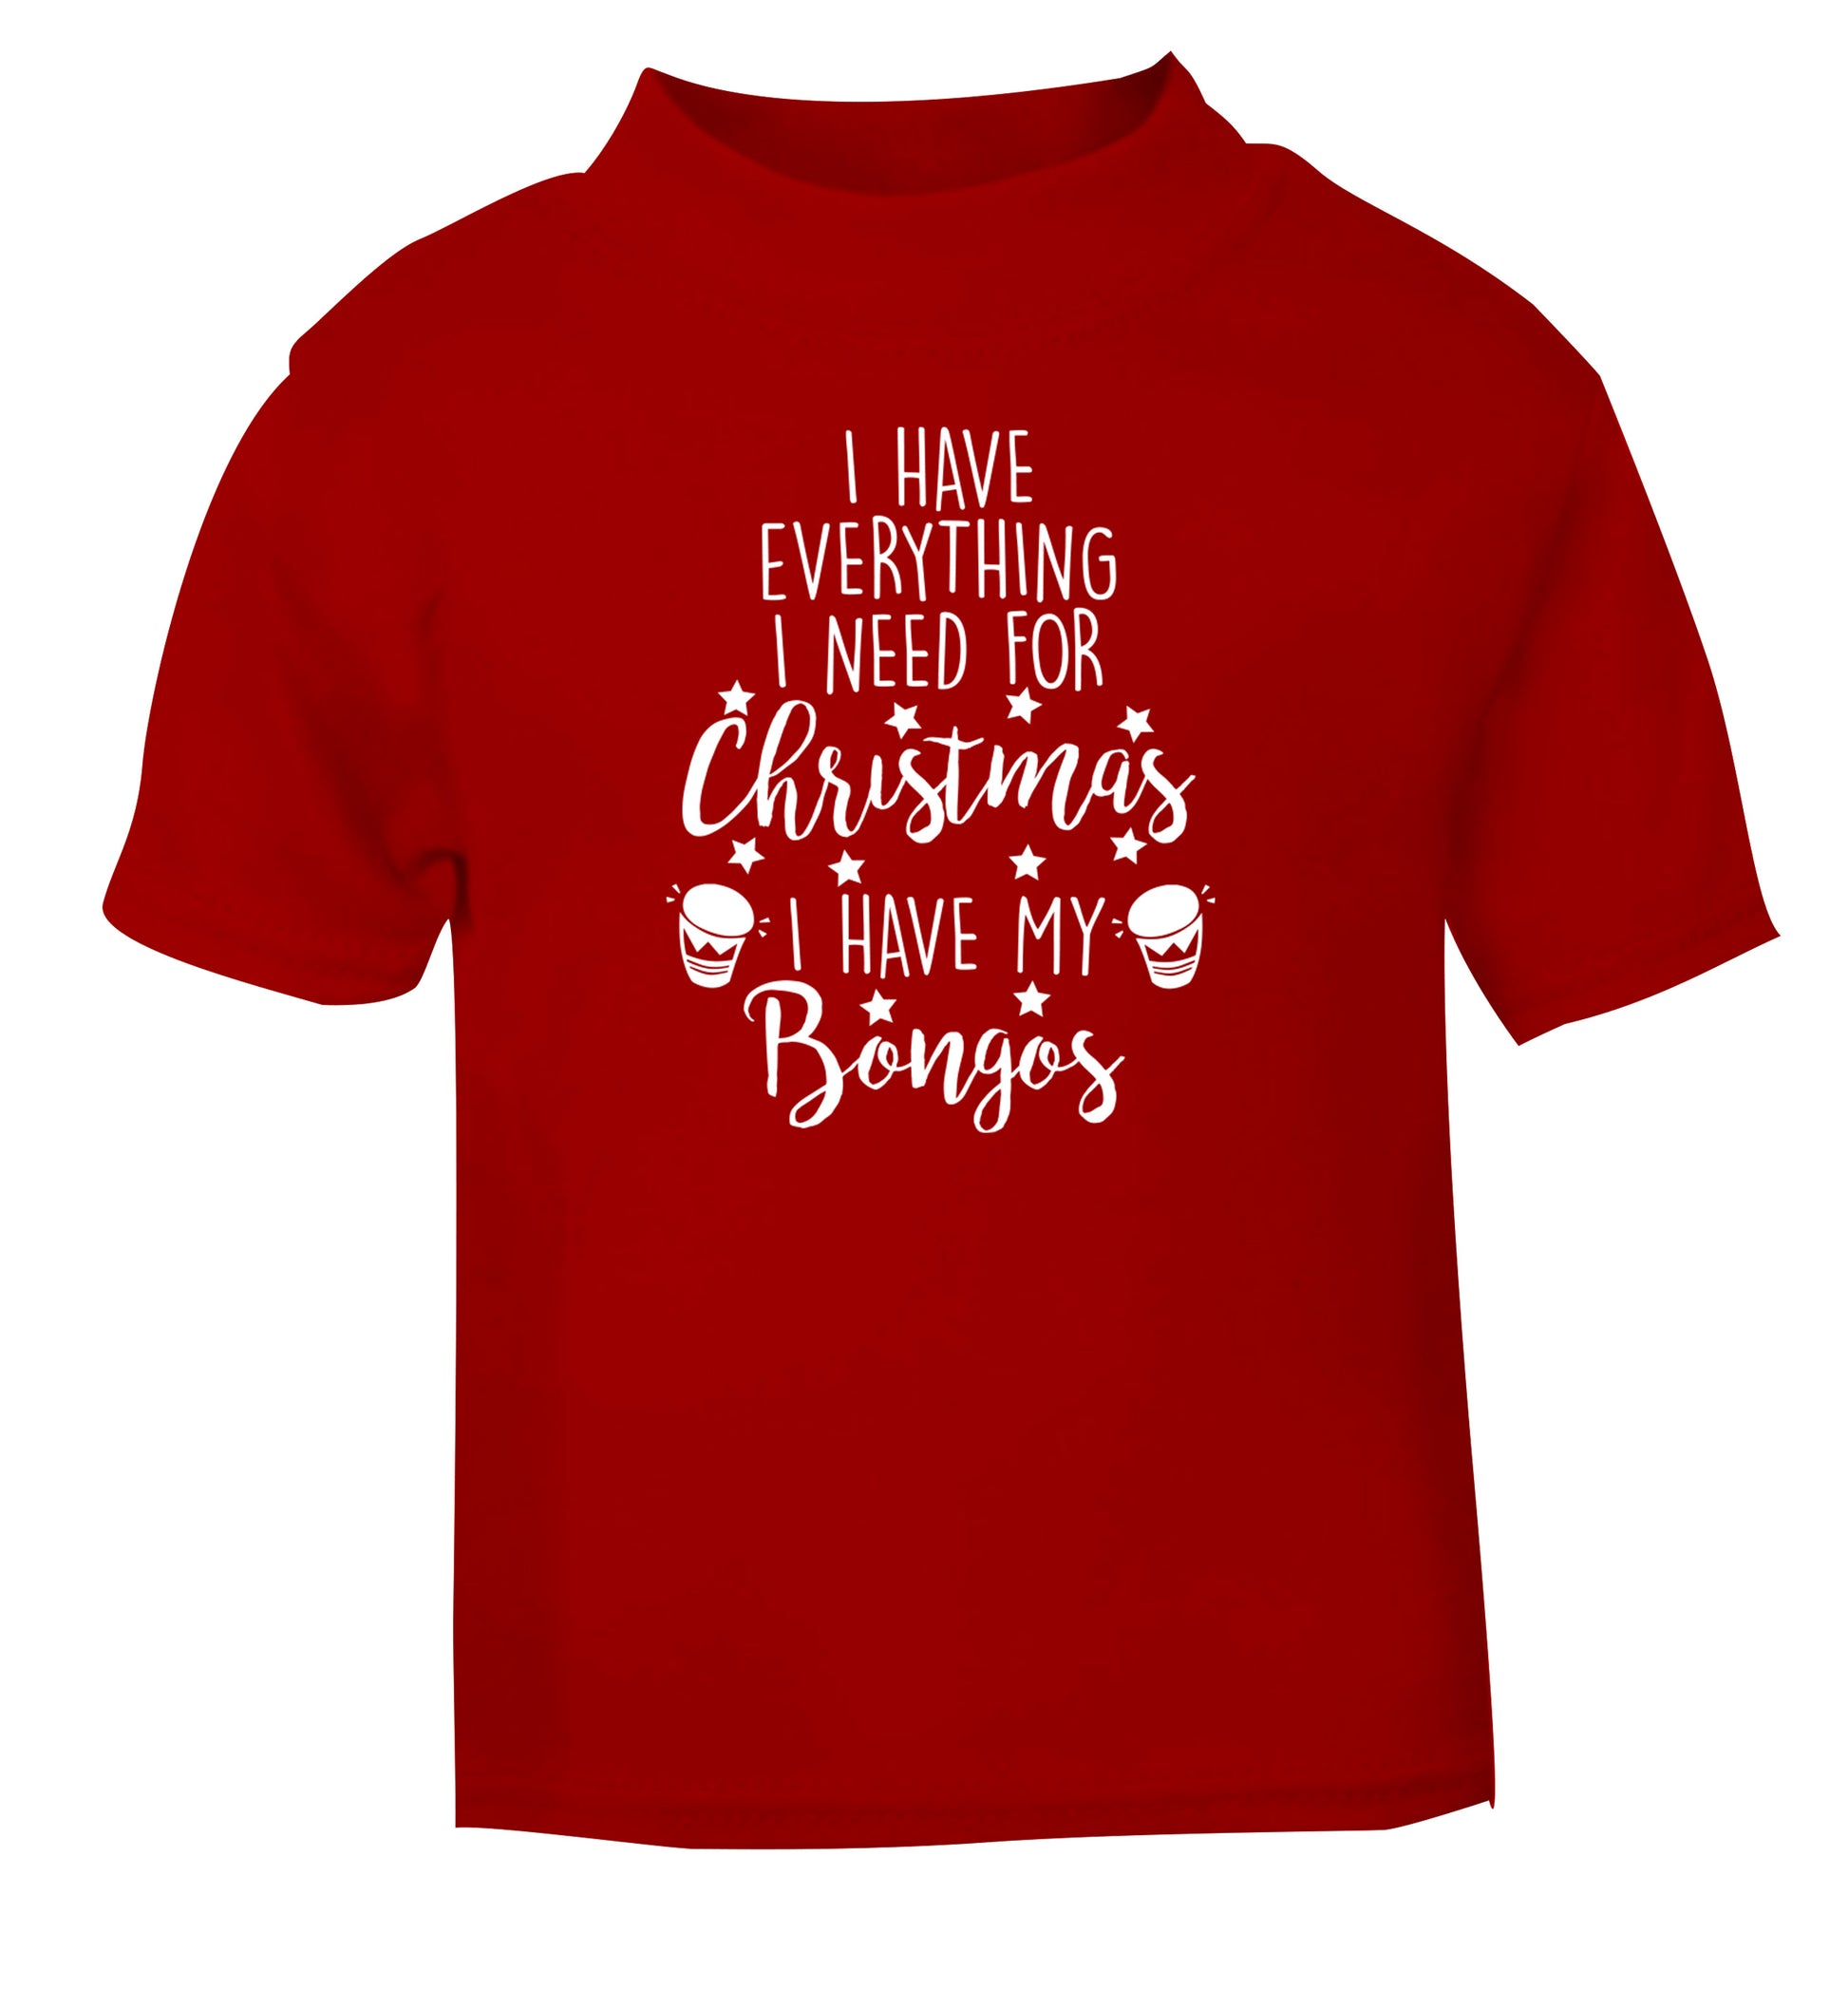 I have everything I need for Christmas I have my bongos! red Baby Toddler Tshirt 2 Years